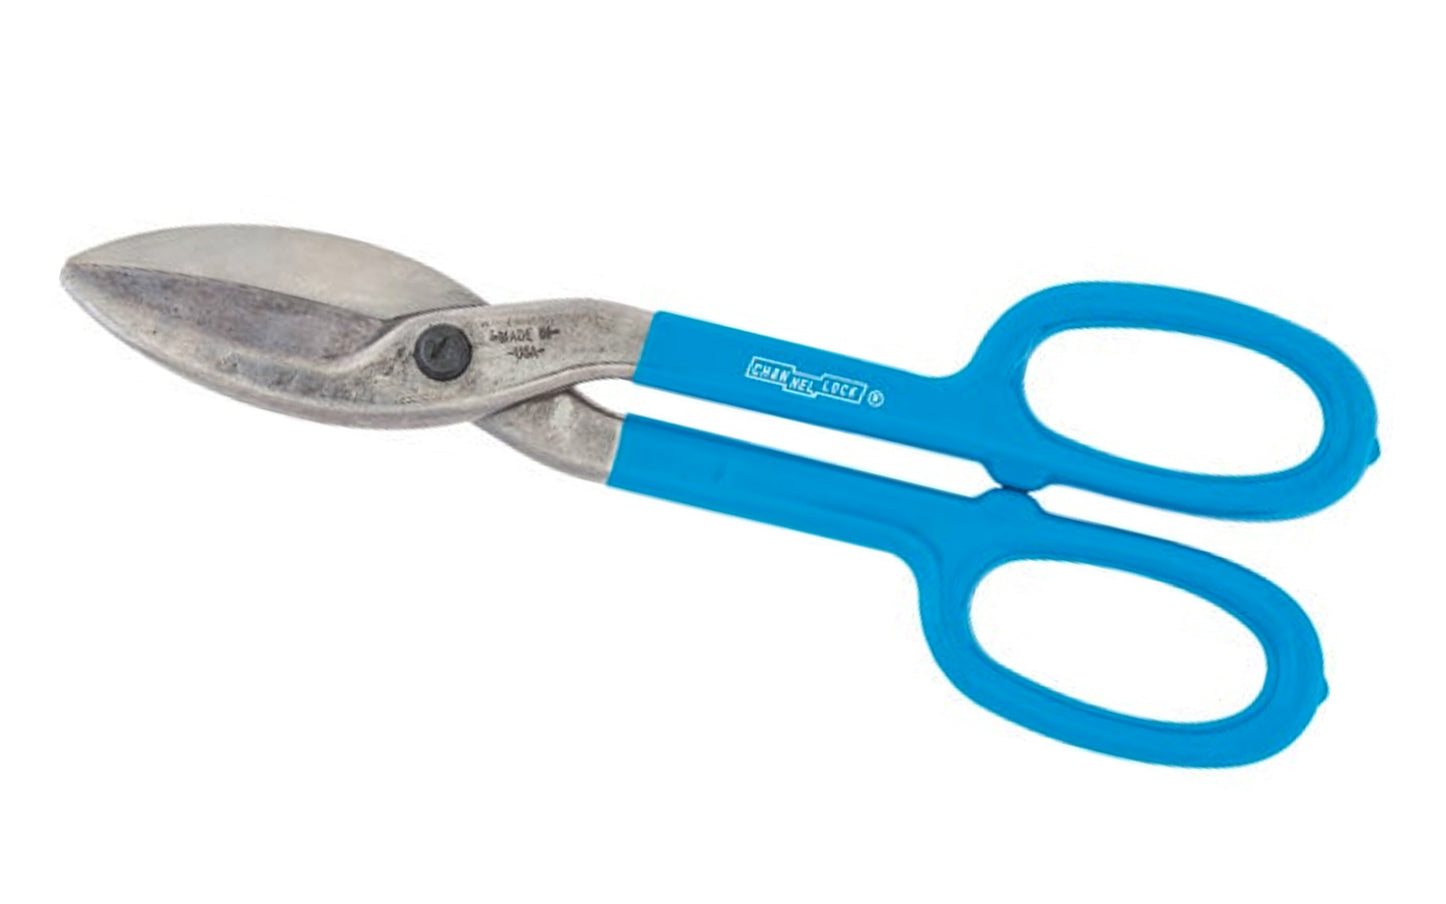 These 10" Traditional Tinner Snips cuts straight, wide, & tight curves in any direction. Custom head-treated blades precision machined to last longer. Grips designed for durability & comfort. Channelock Tin Snips are 100% Made in the USA & forged from molybdenum alloy steel. Channellock Model 610TS.  Made in USA.